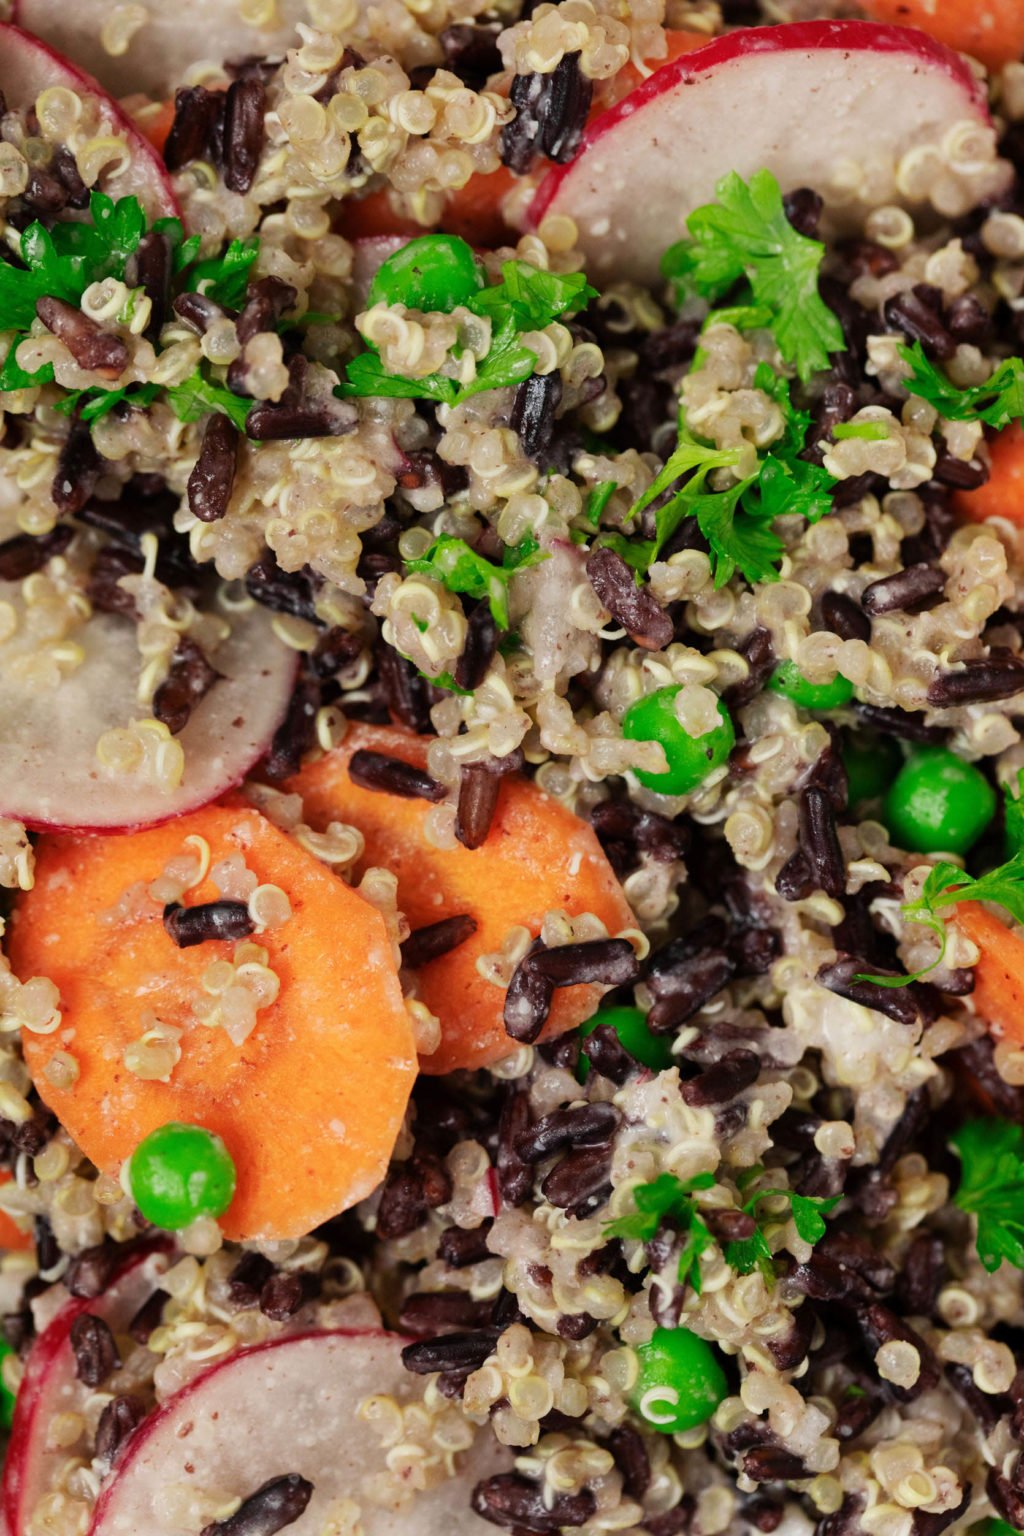 A close-up image of a medley of grains, herbs, and vegetables.